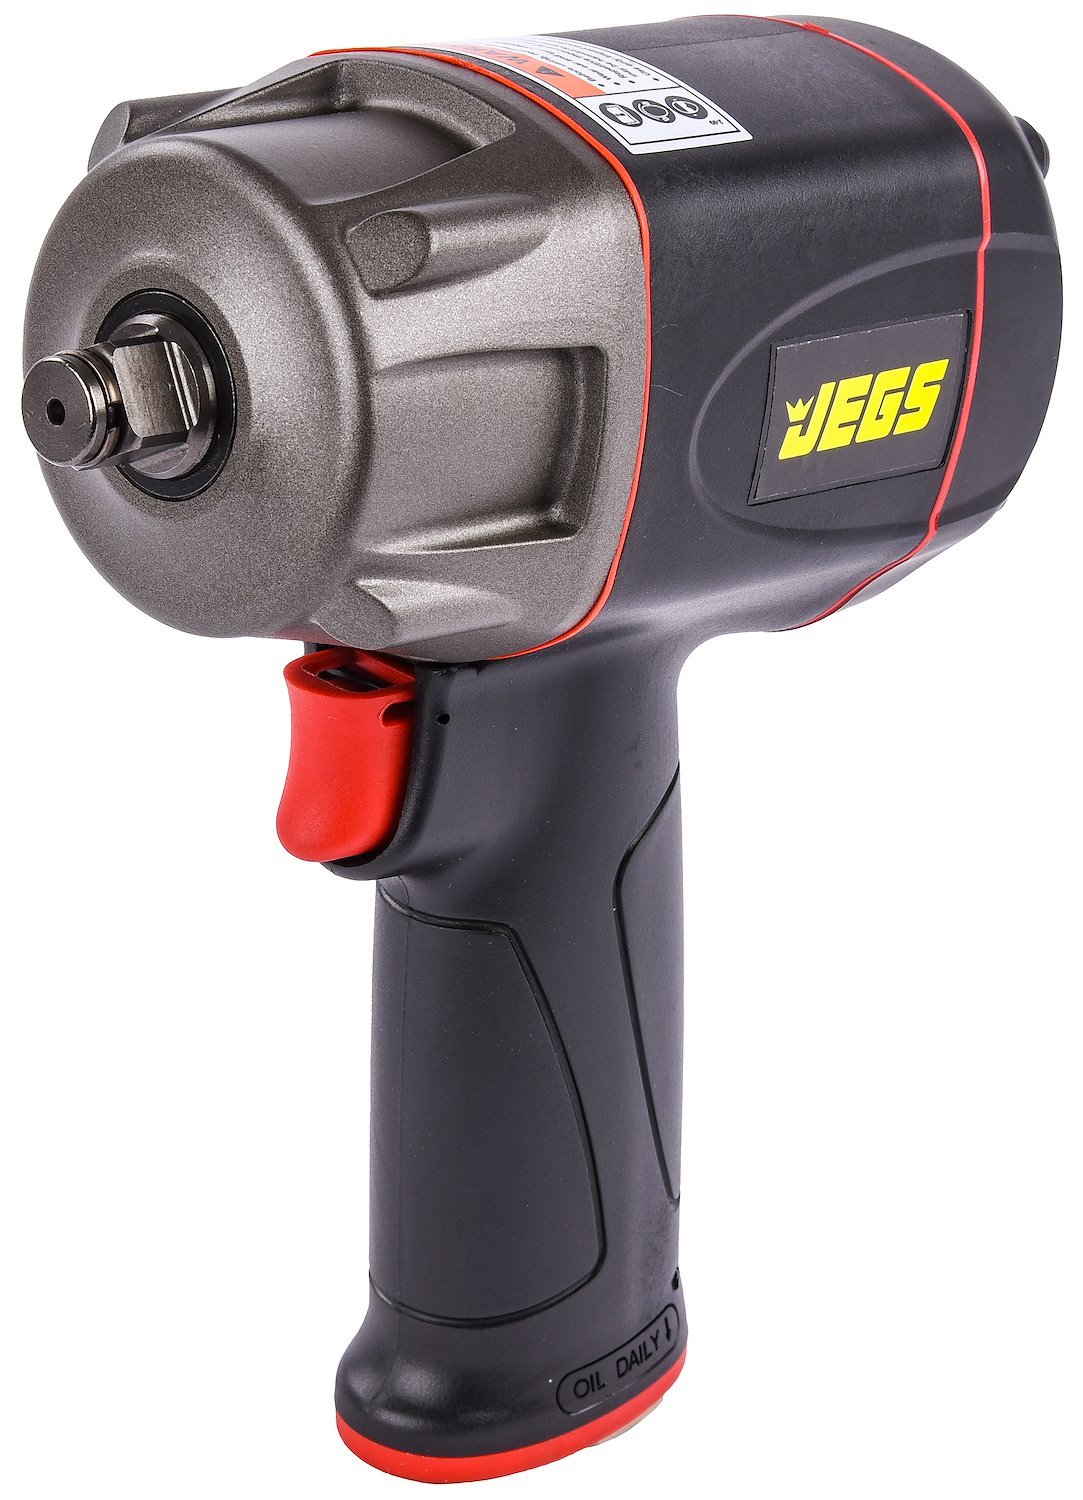 JEGS 81130: Super Power Compact Reversible Air Impact Wrench [1/2 in.  Drive, 1000 ft. lbs. of torque] - JEGS